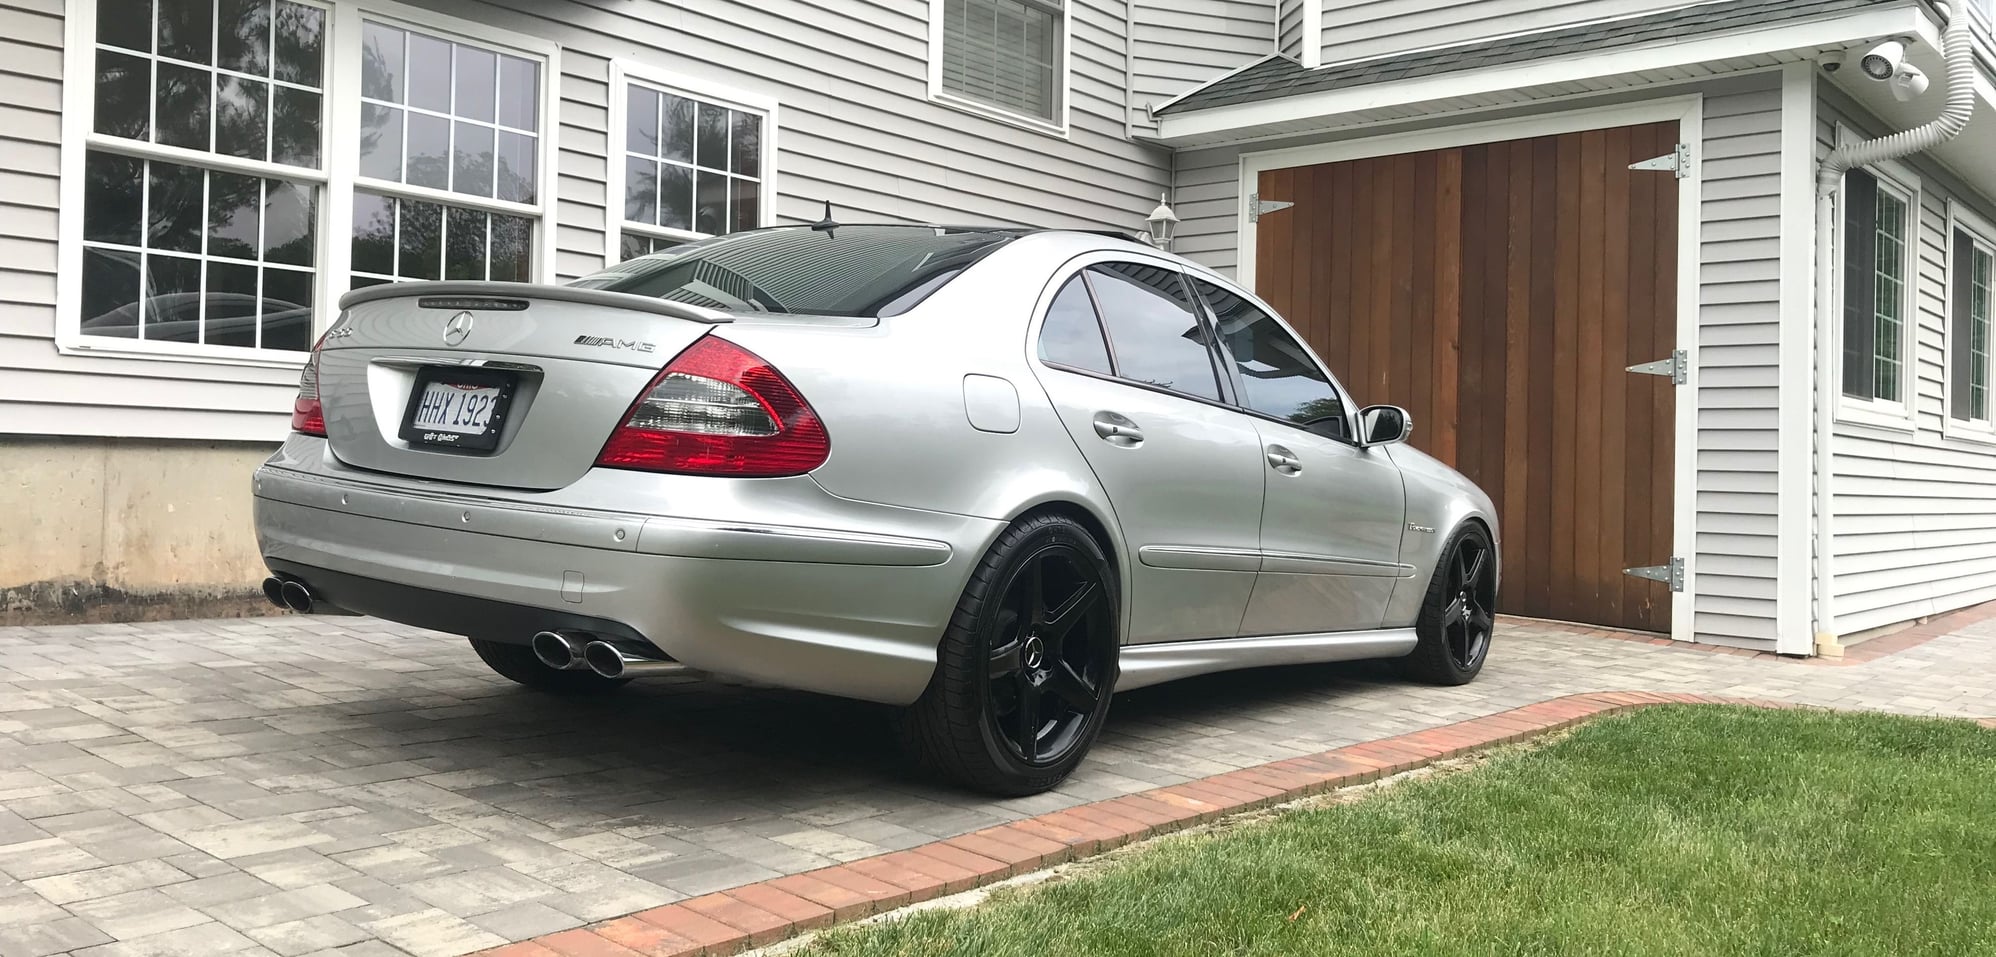 2004 Mercedes-Benz E55 AMG - 2004 MB E55 WEISTEC!!!! - Used - VIN WDBUF76J04A404102 - 124,250 Miles - 8 cyl - 2WD - Automatic - Sedan - Silver - New Haven, CT 06511, United States